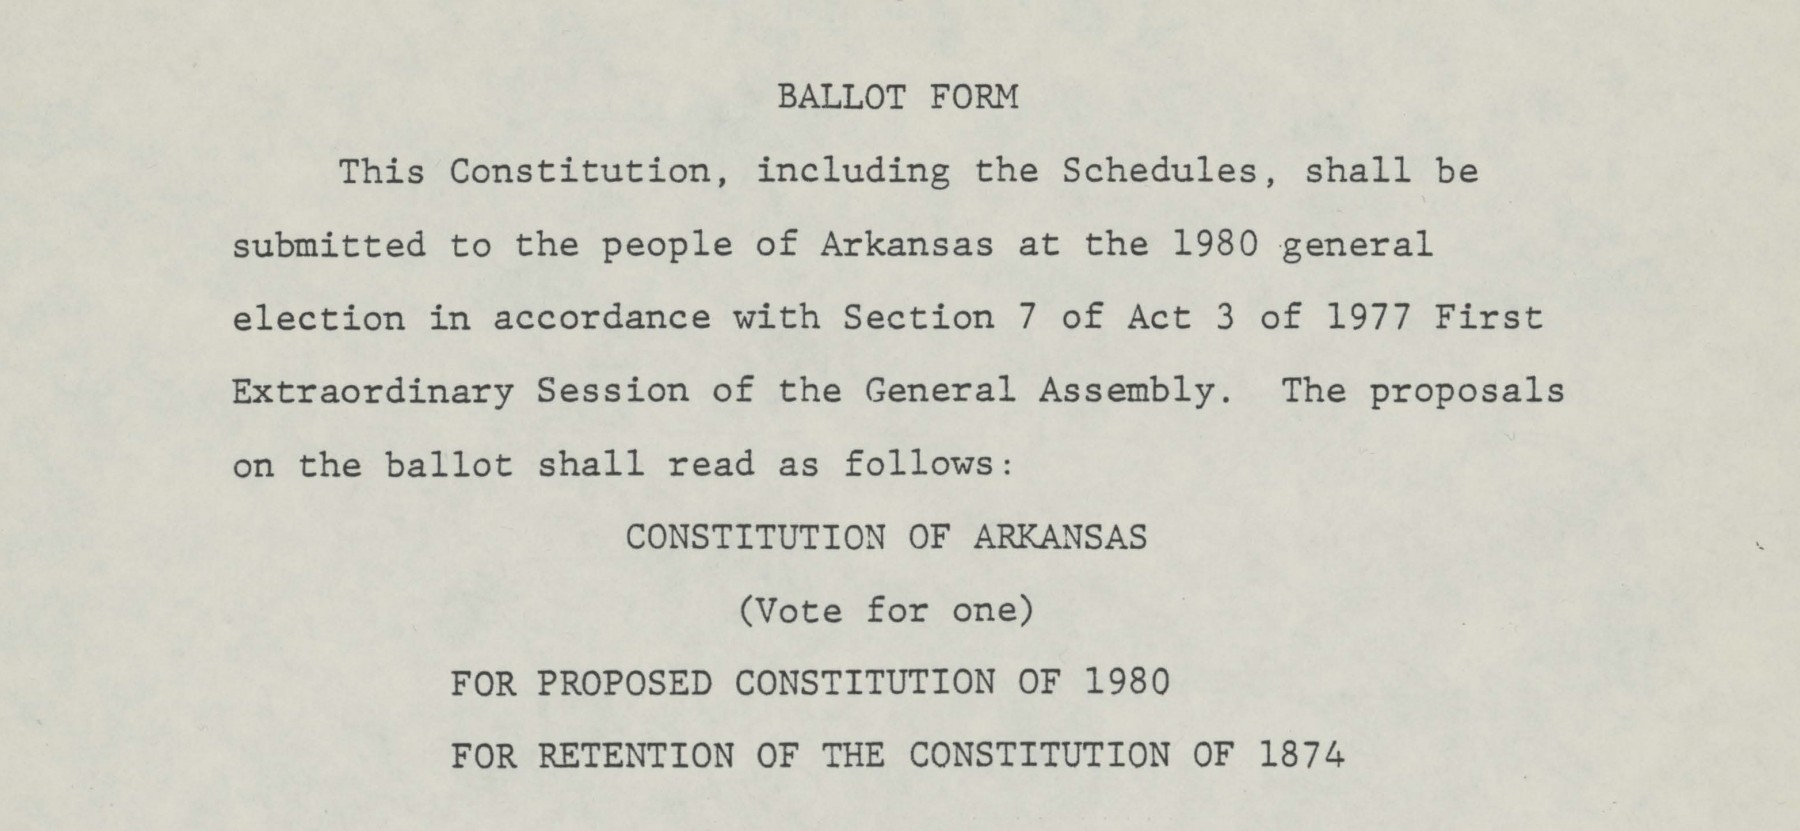 Ballot Form for the Proposed Constitution of 1980